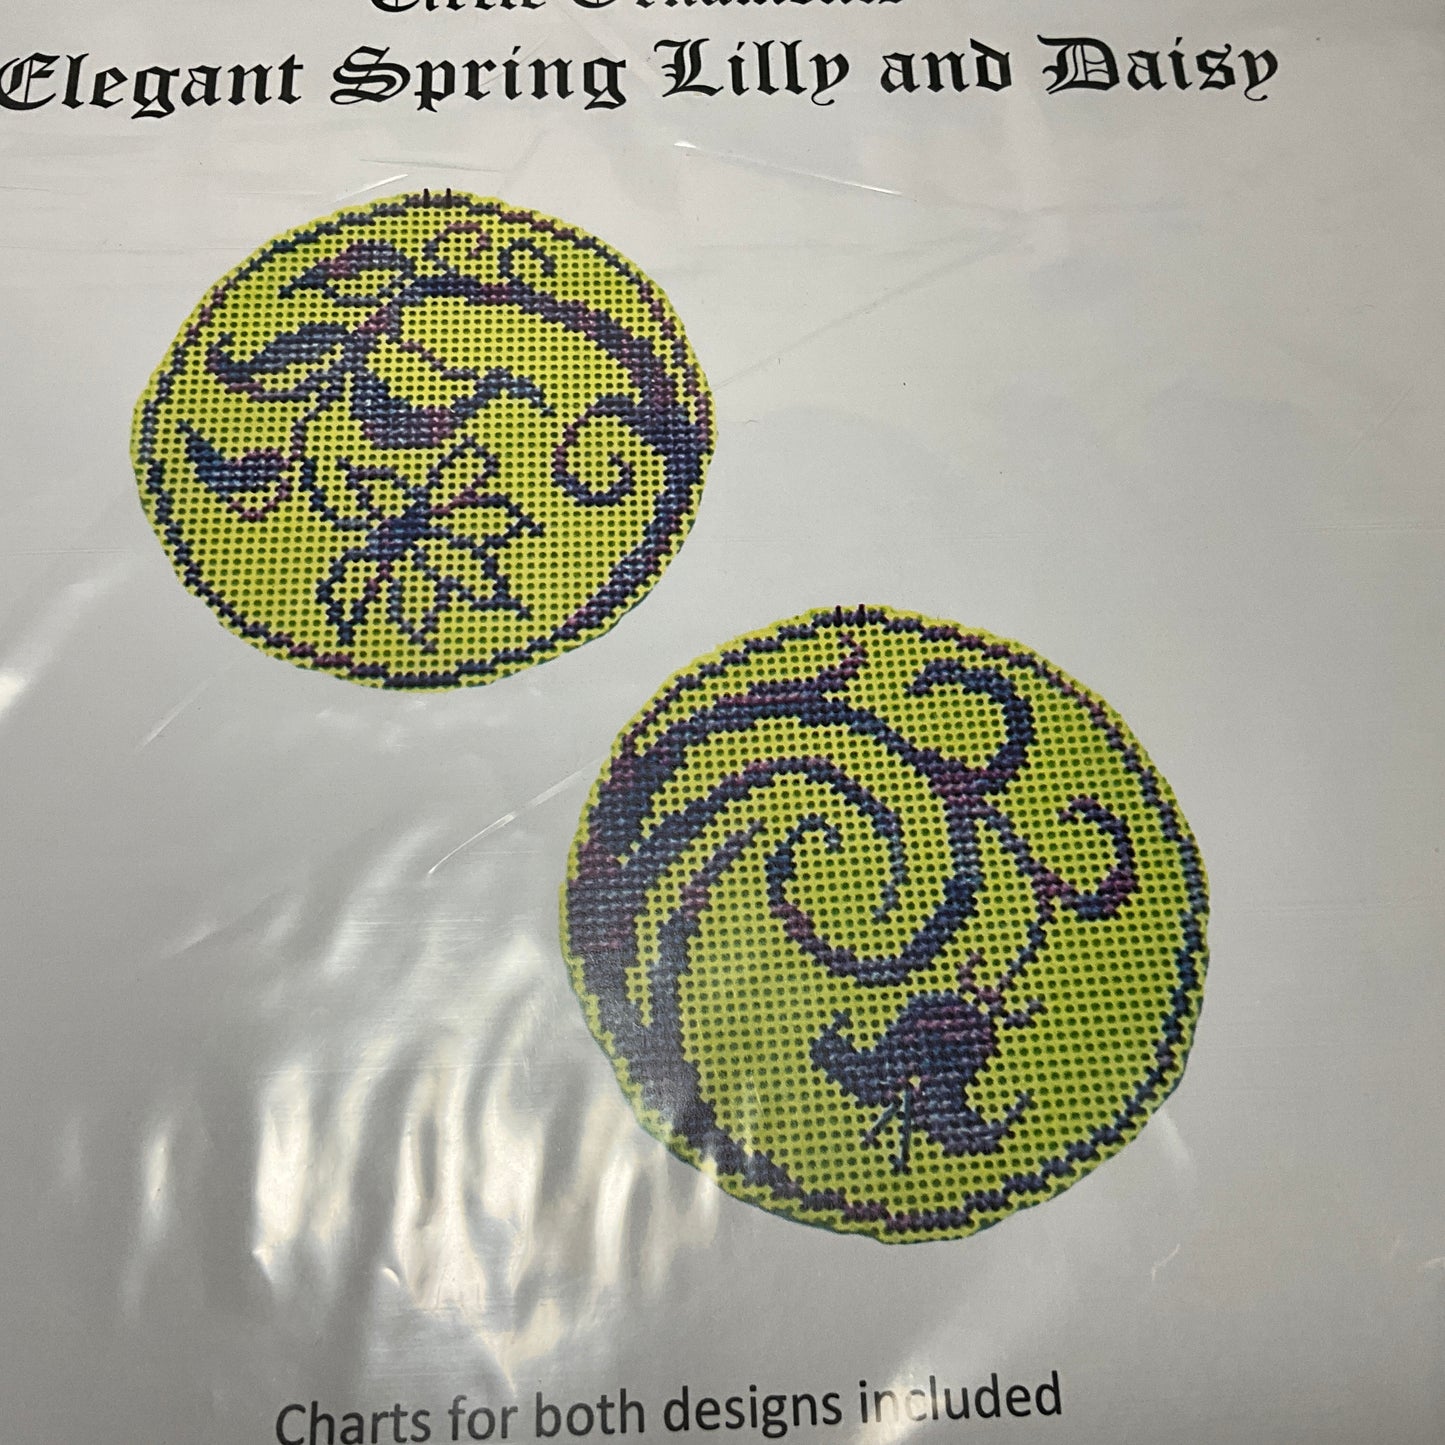 Handblessings Eileen Gurak Needlework Designs set of 2 Circle ornament charts see pictures and description*